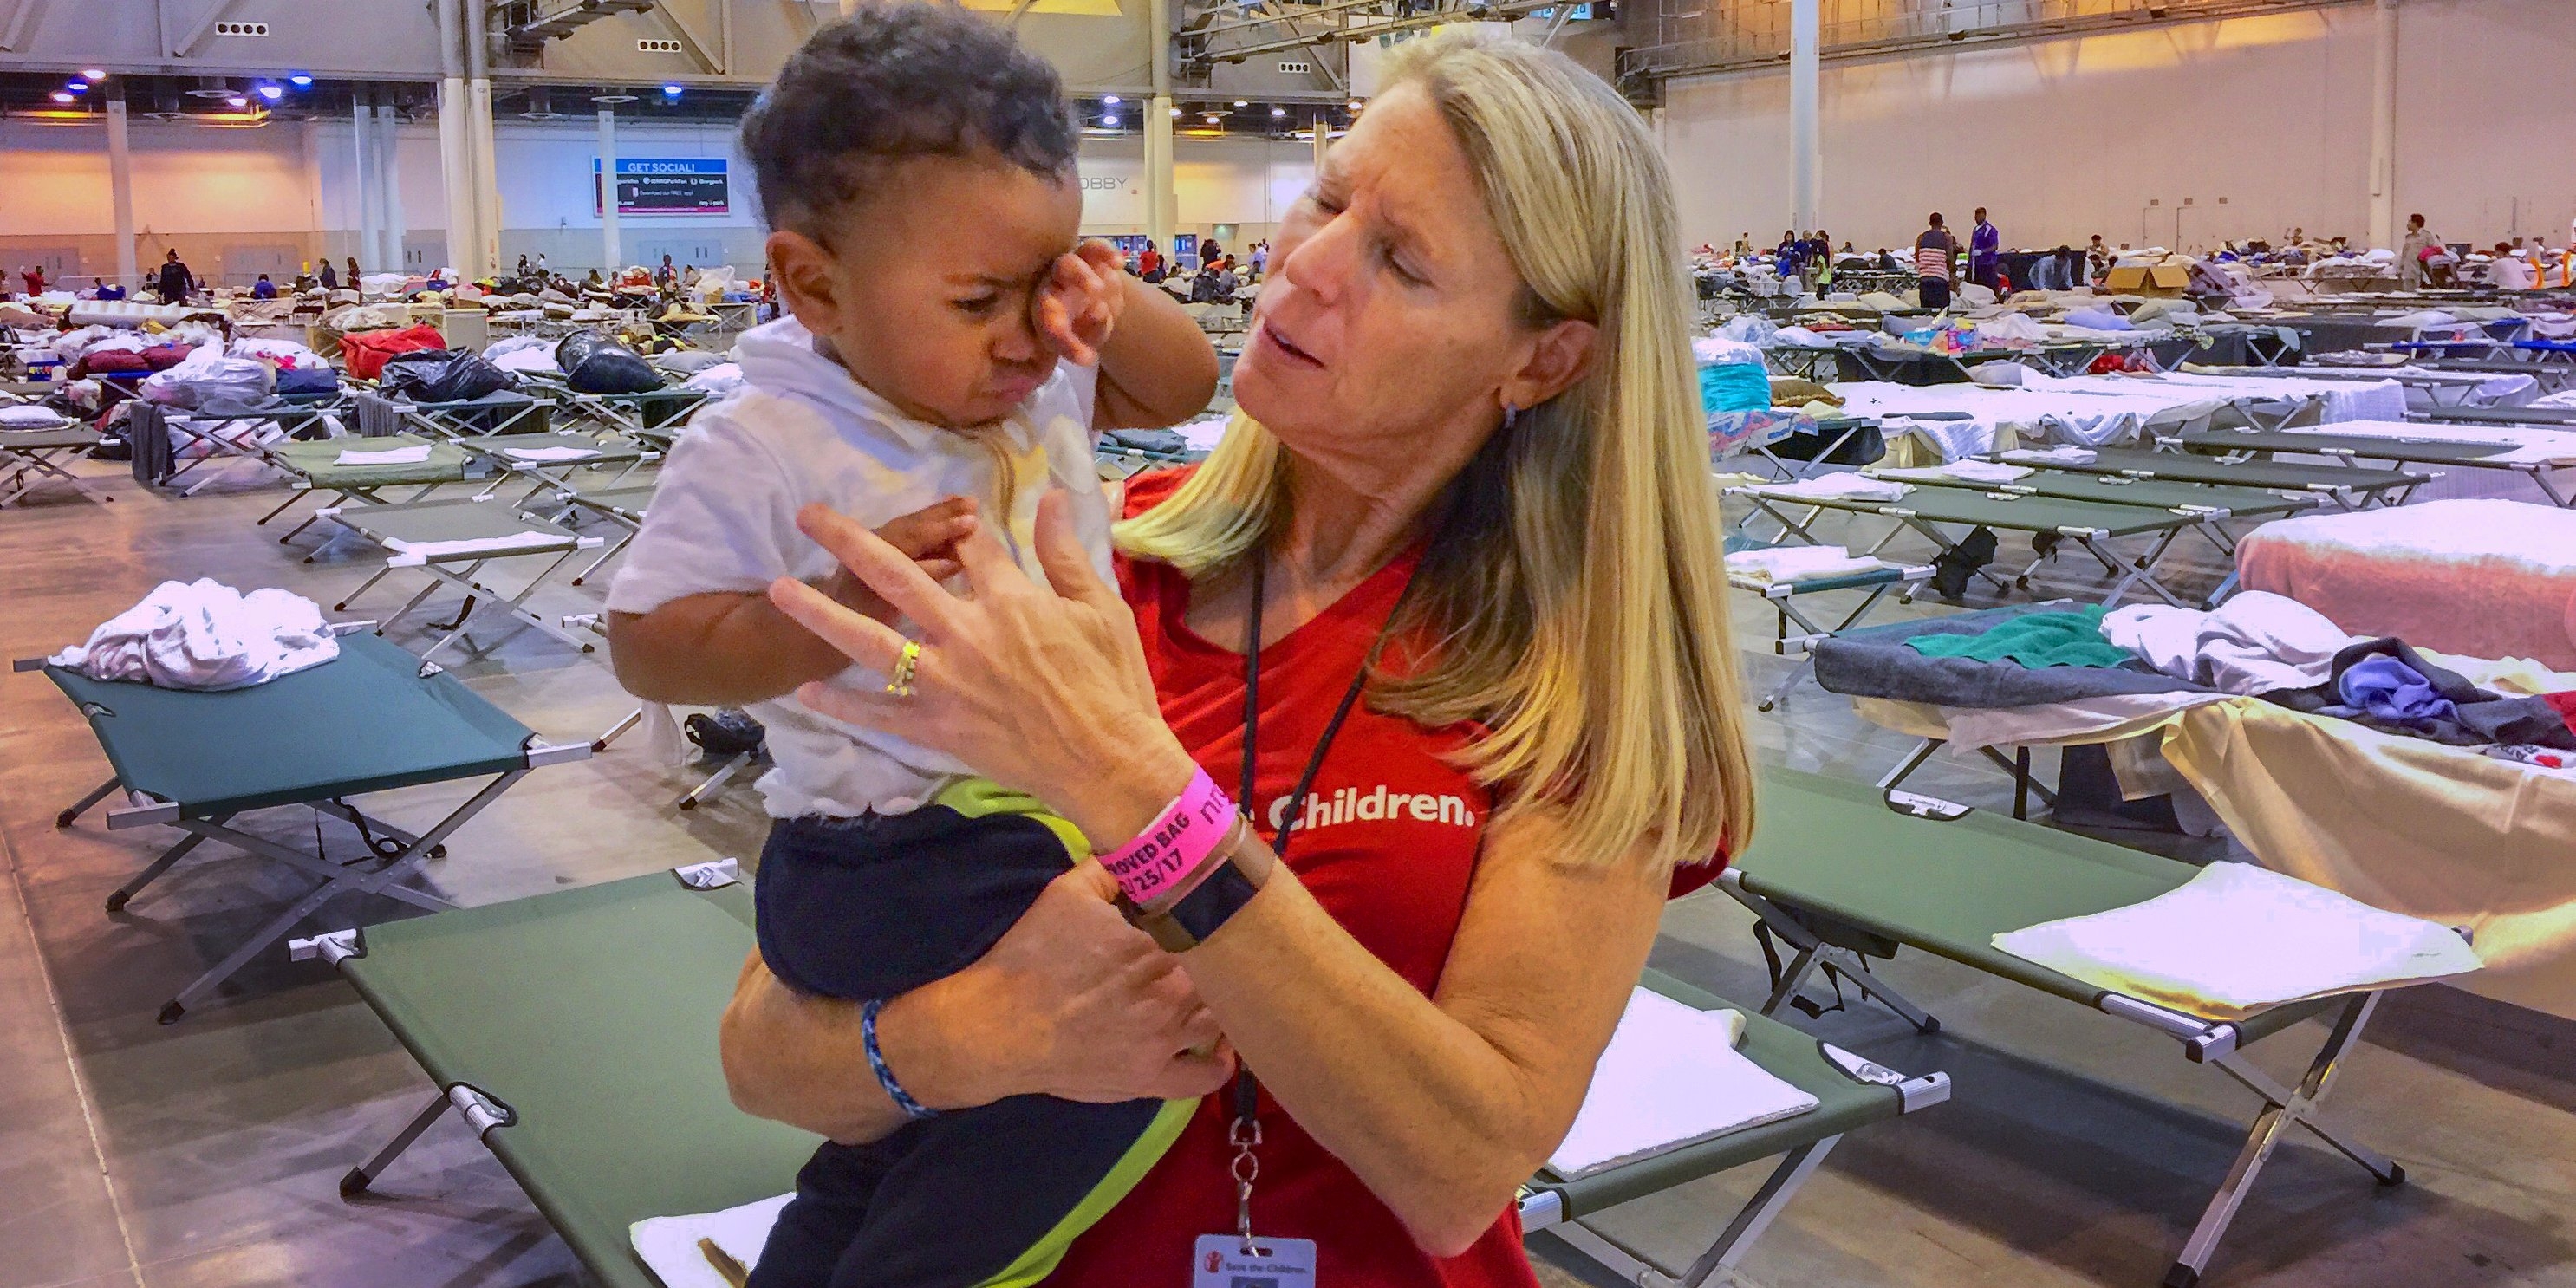 Carolyn Miles, president & CEO of Save the Children meets with families in a mega-shelter in Houston, Texas. Photo Credit Susan Warner/Save the Children 2017.